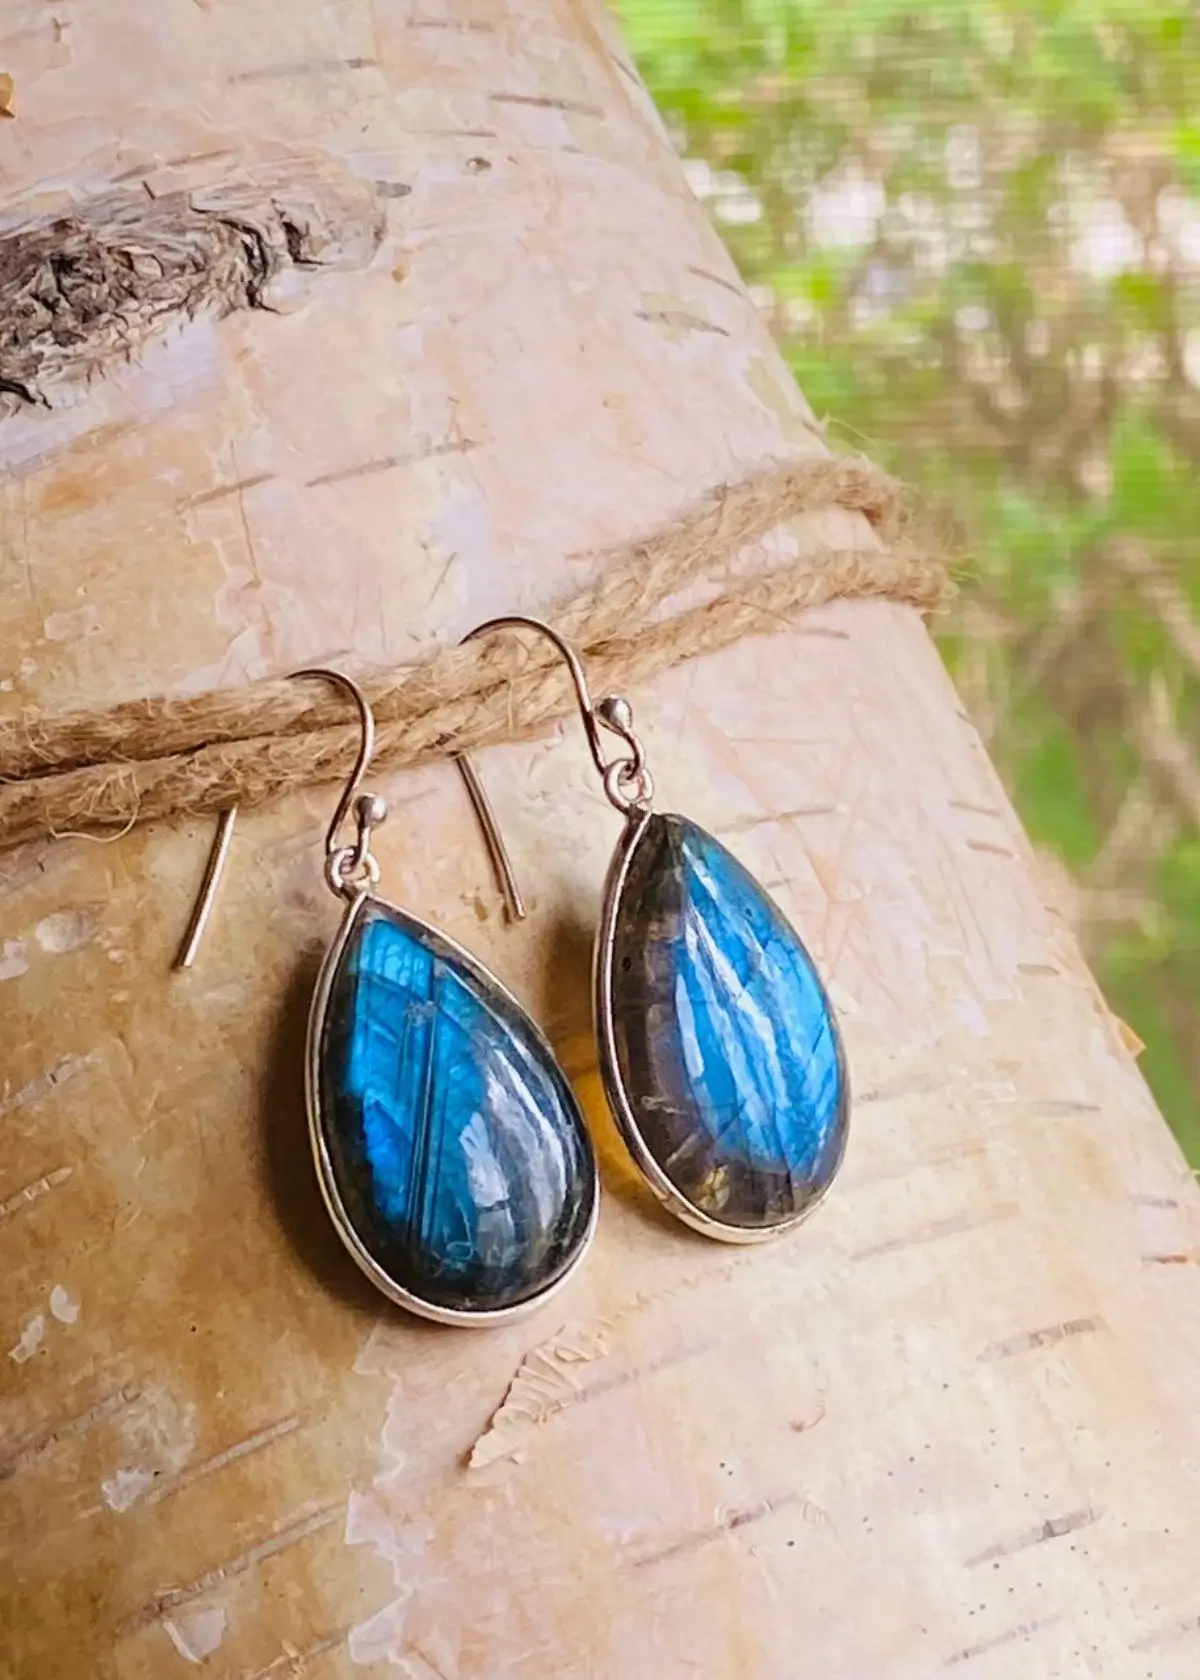 How to choose the right labradorite earrings?